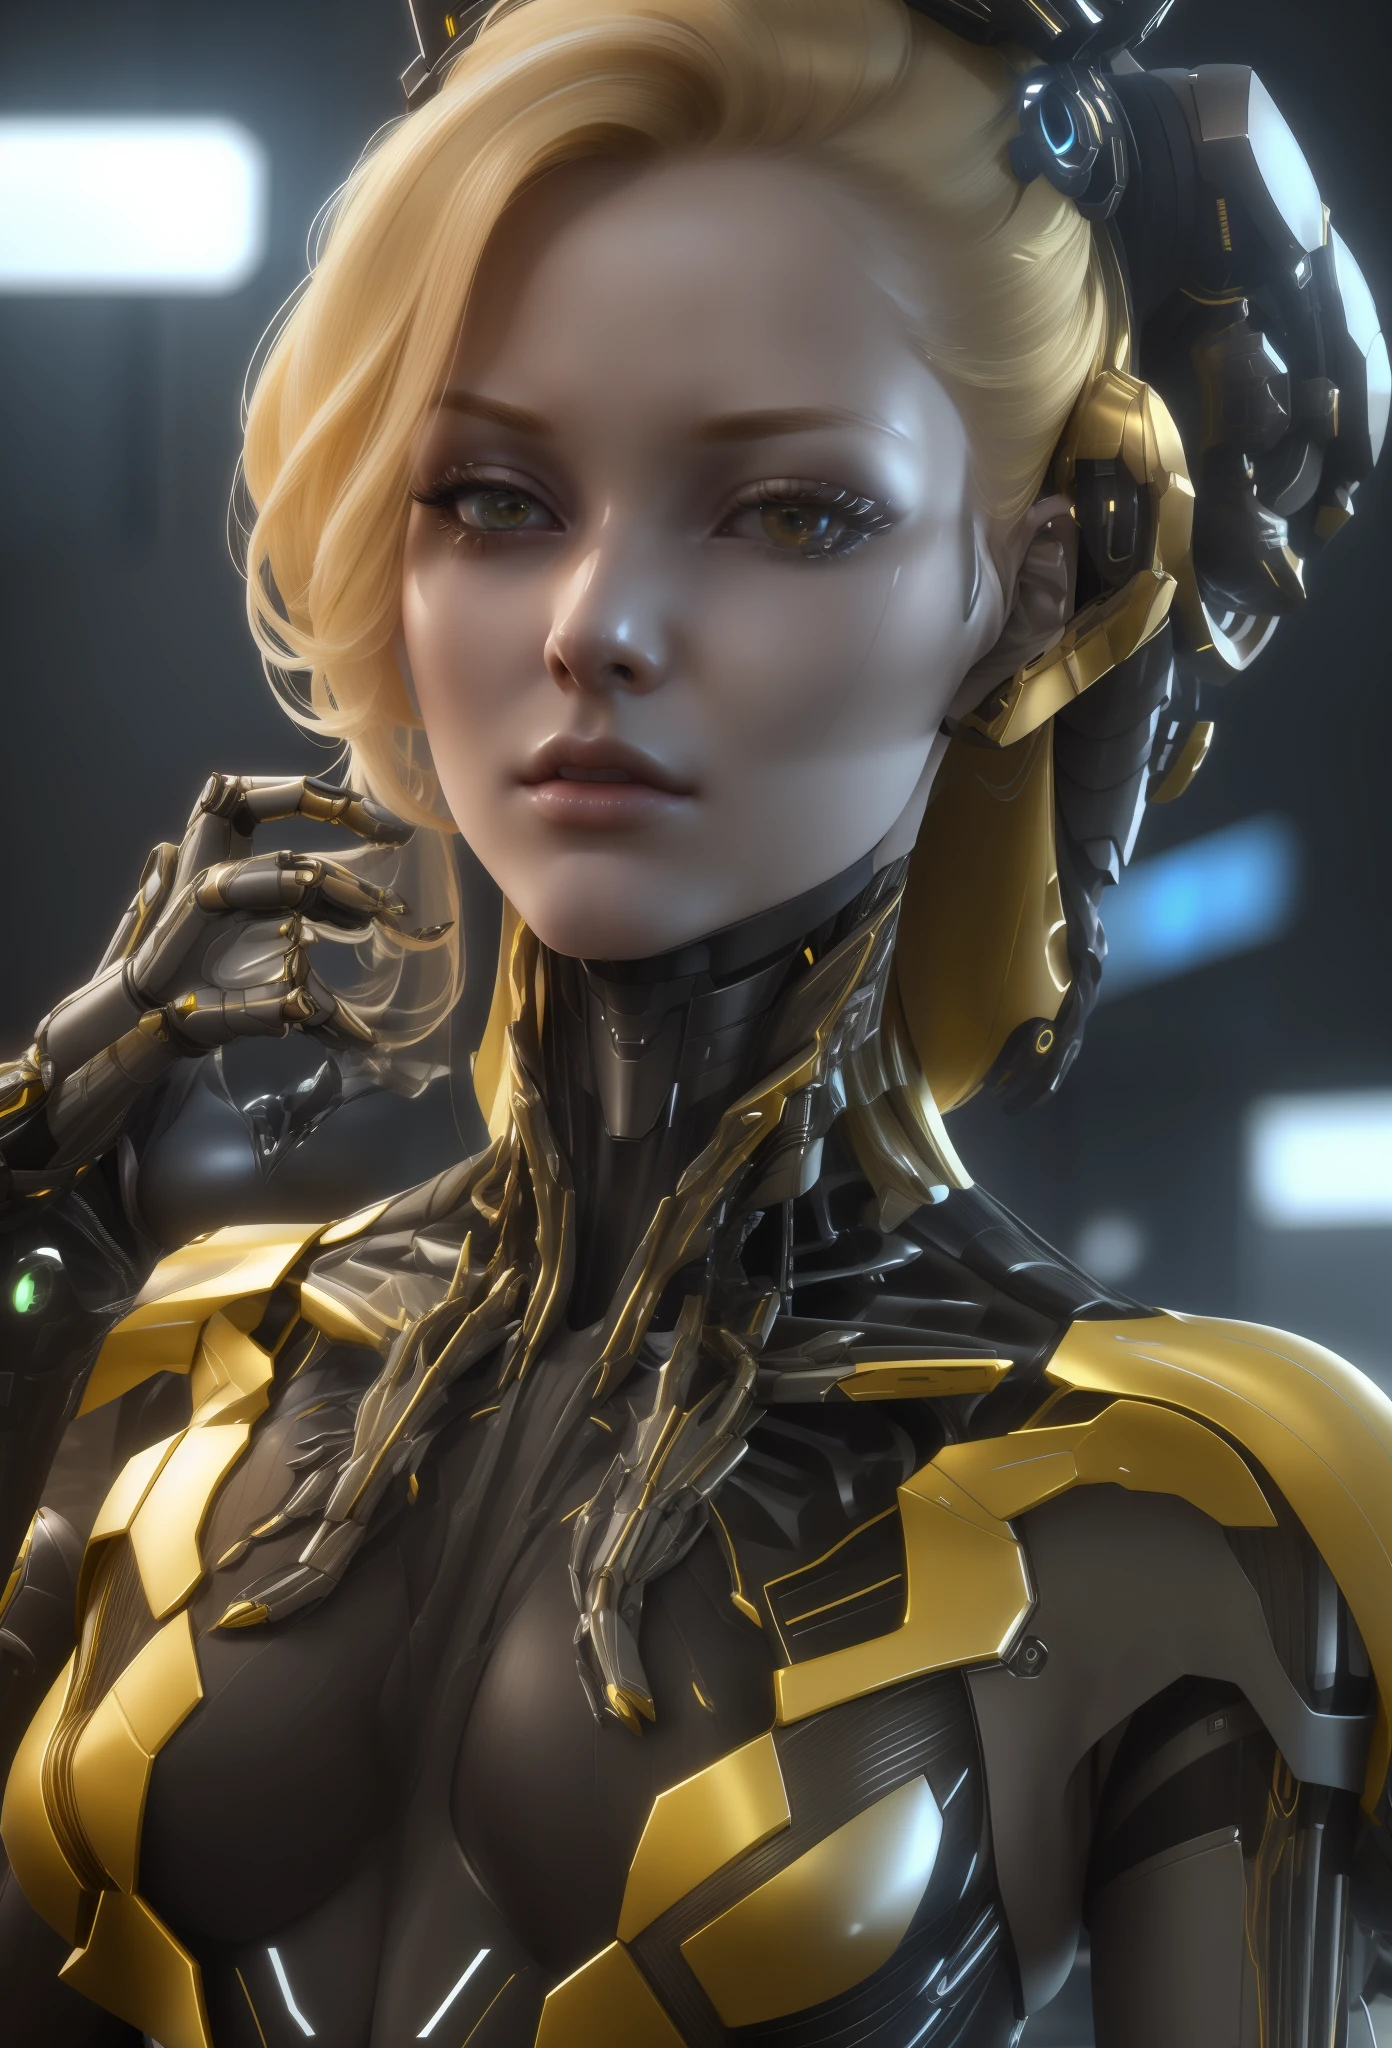 blond woman in a futuristic suit posing for a picture, cgsociety uhd 4k highly detailed, beautiful alluring female cyborg, 3 d render character art 8 k, unreal engine render + a goddess, cyborg fashion model, beautiful female android, perfect cyborg female, cyberpunk art ultrarealistic 8k, beautiful female cyborg, girl in mecha cyber armor, 8k portrait render